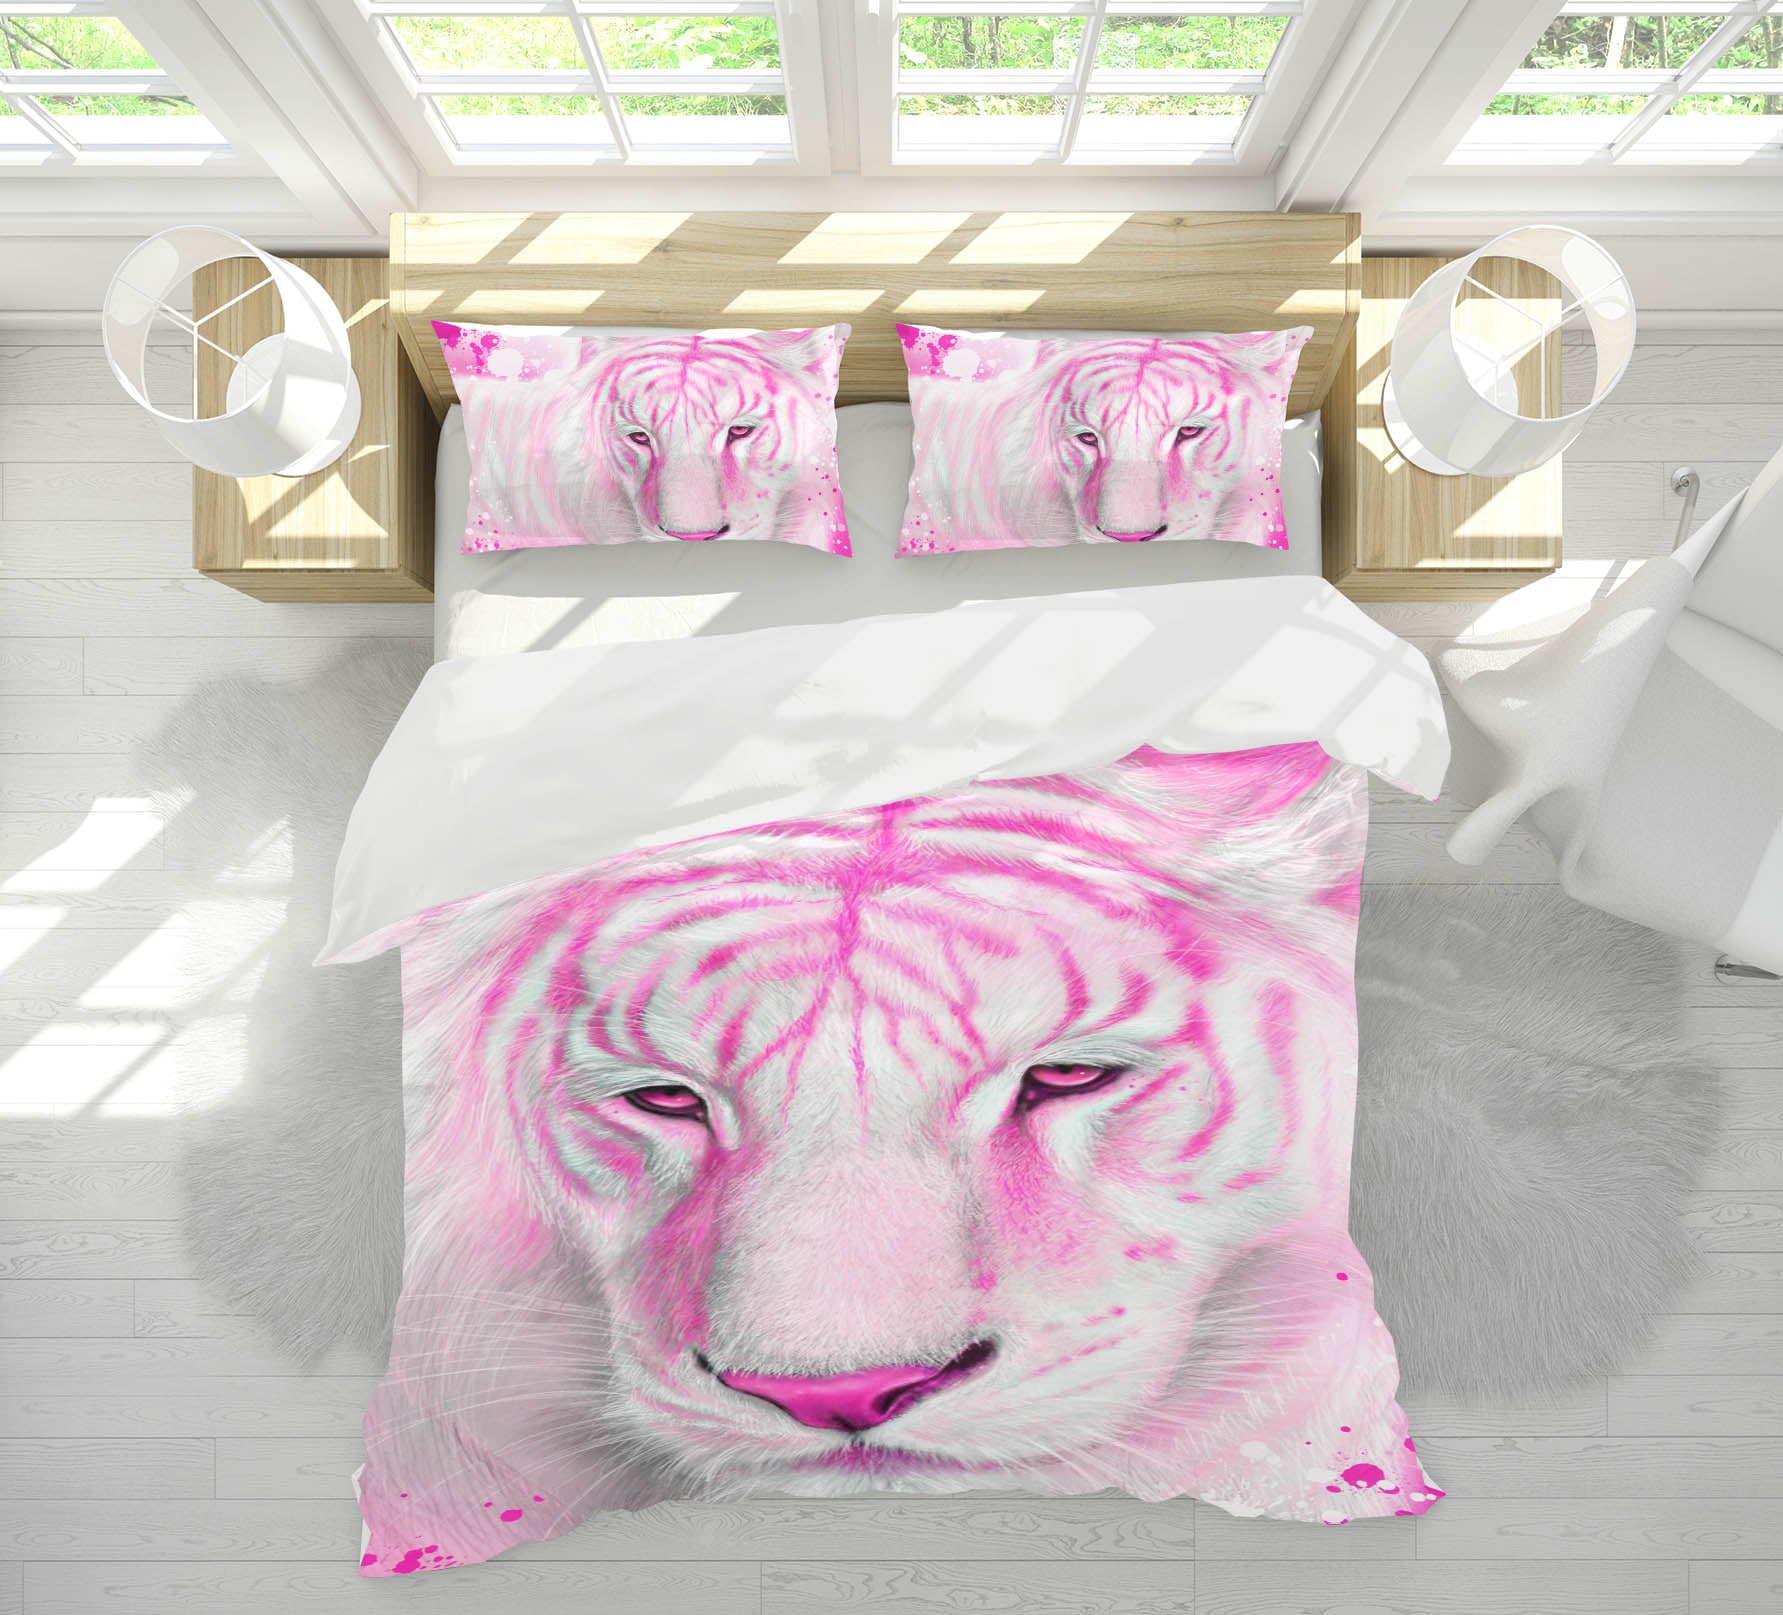 3D Pink Tiger 8555 Sheena Pike Bedding Bed Pillowcases Quilt Cover Duvet Cover